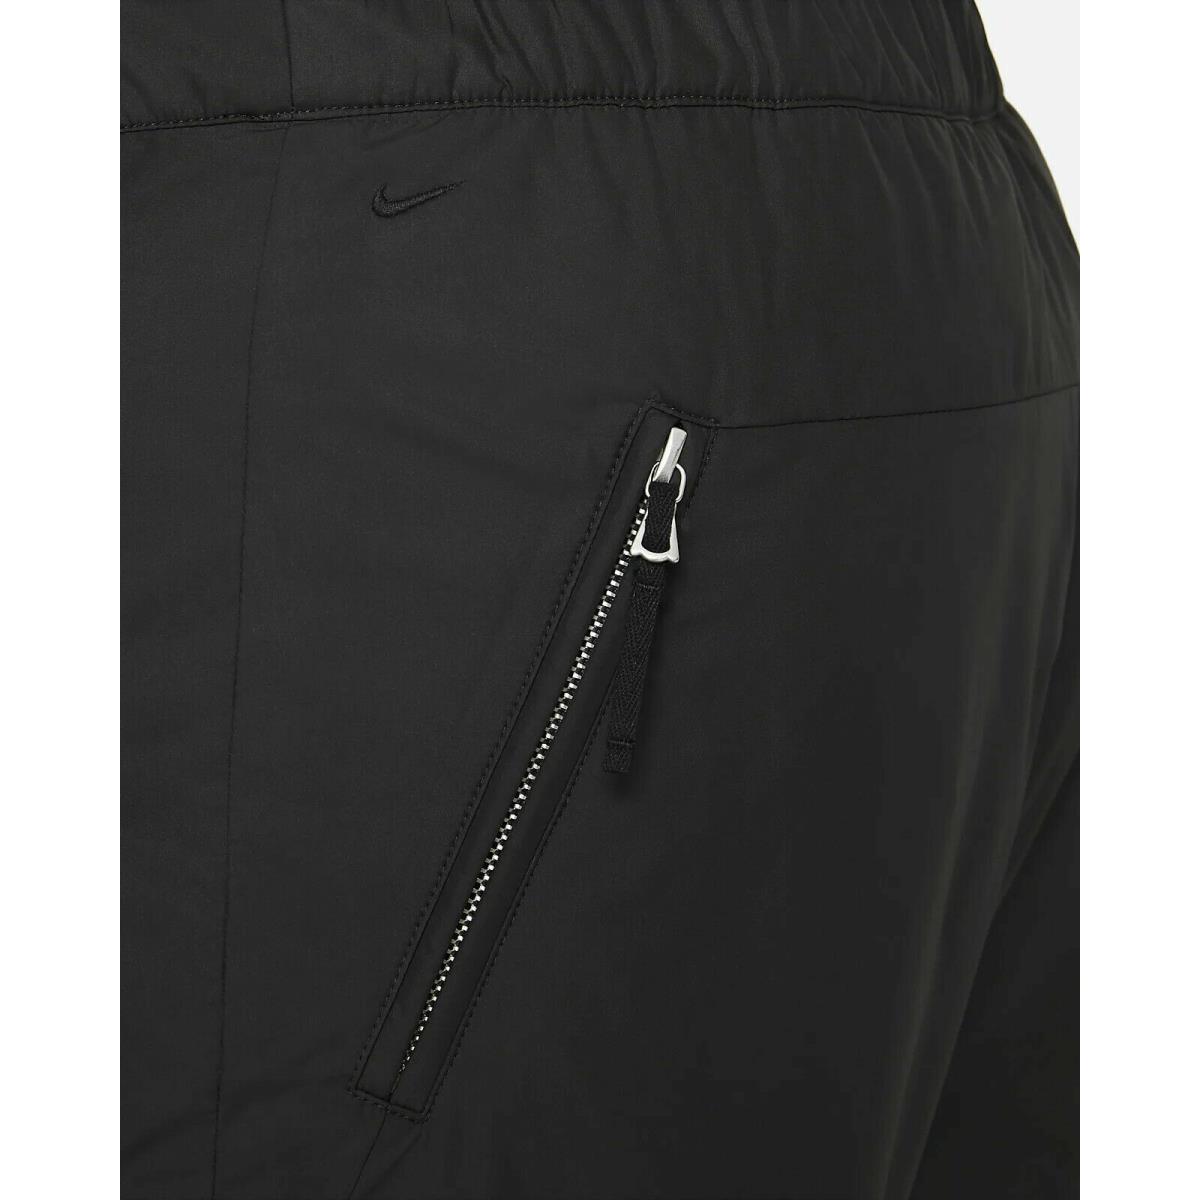 Nike clothing Every Stitch Considered Pants - Black 4